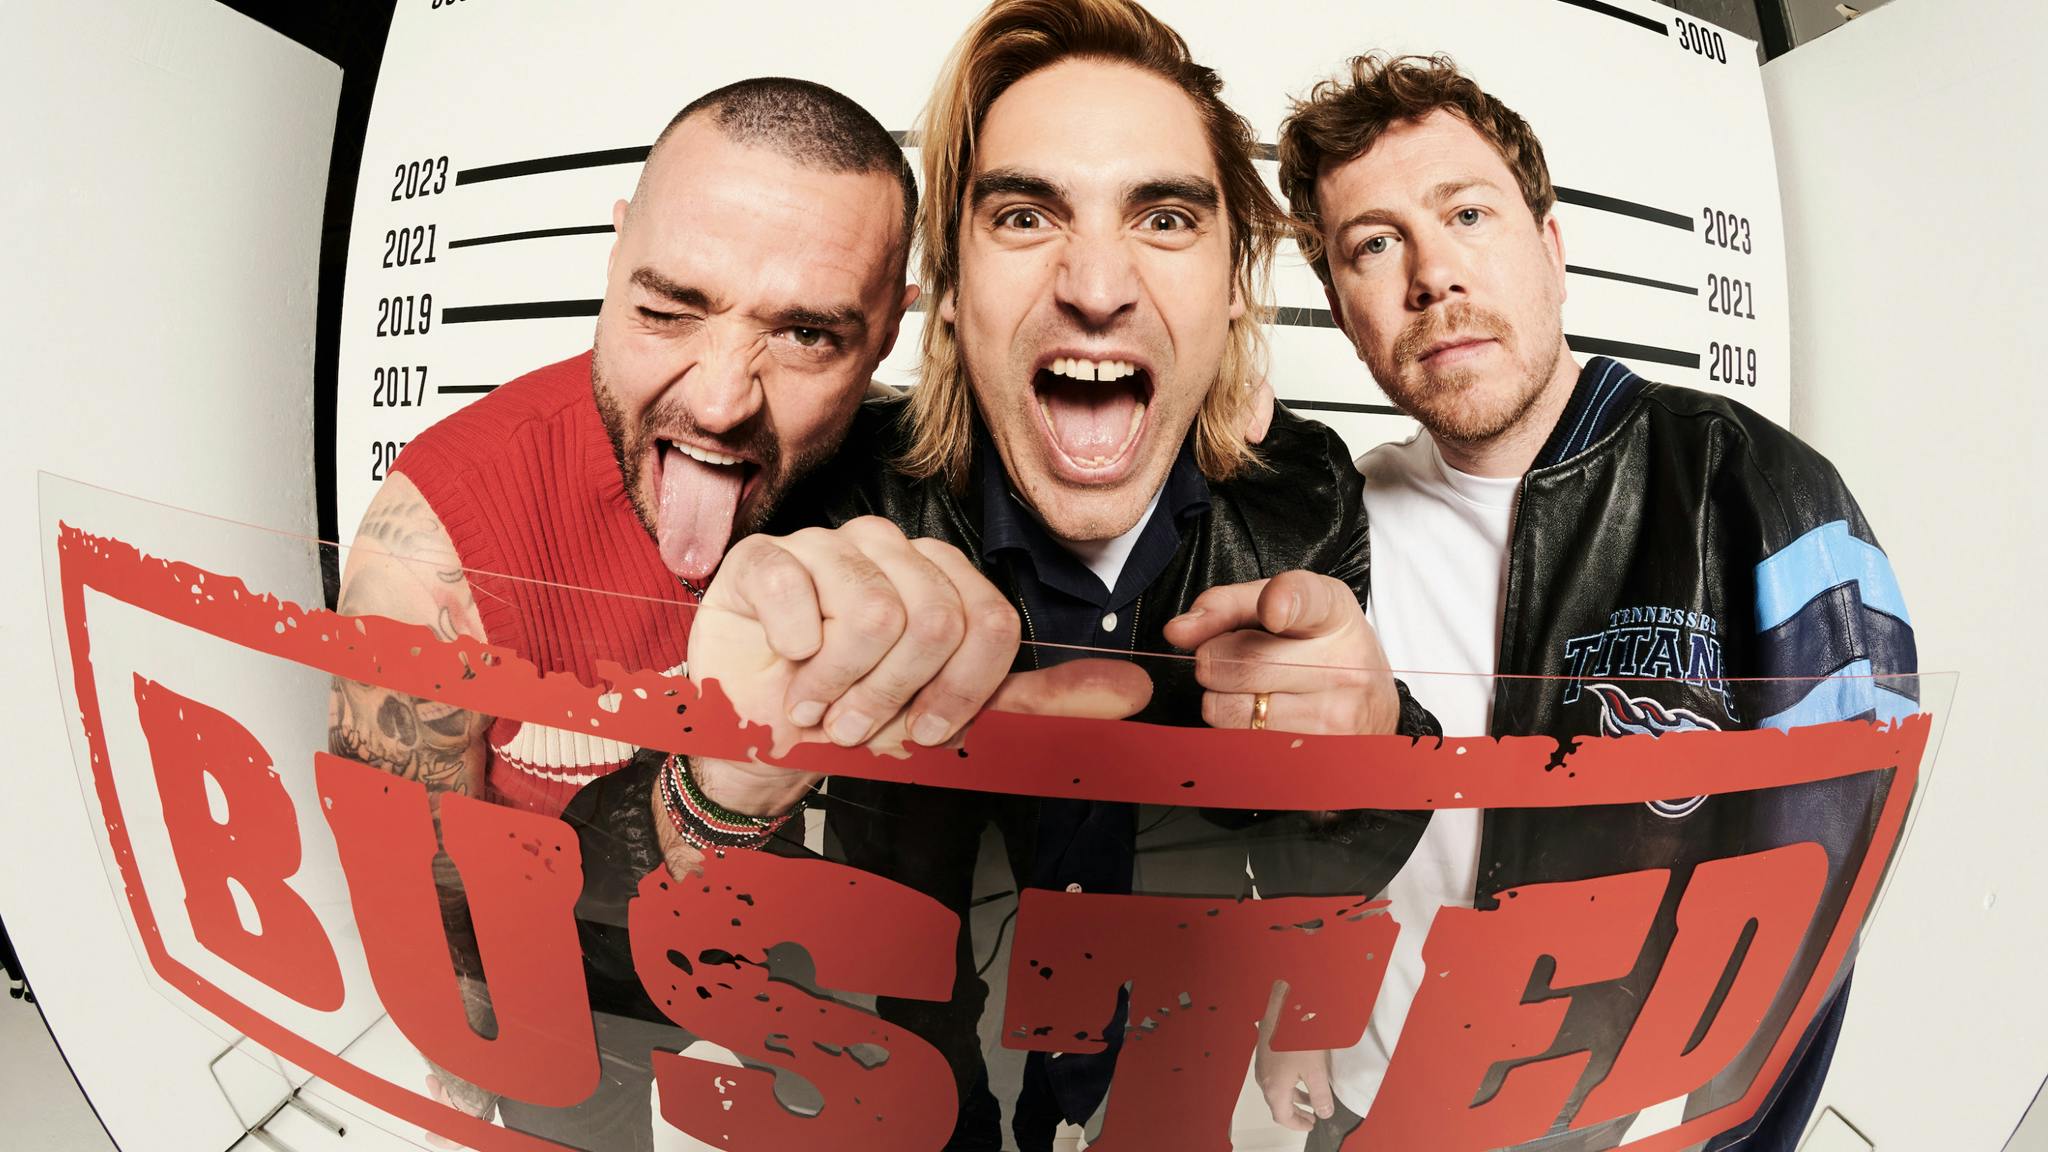 Busted announce Greatest Hits 2.0 album featuring You Me At Six, Dashboard Confessional and loads more